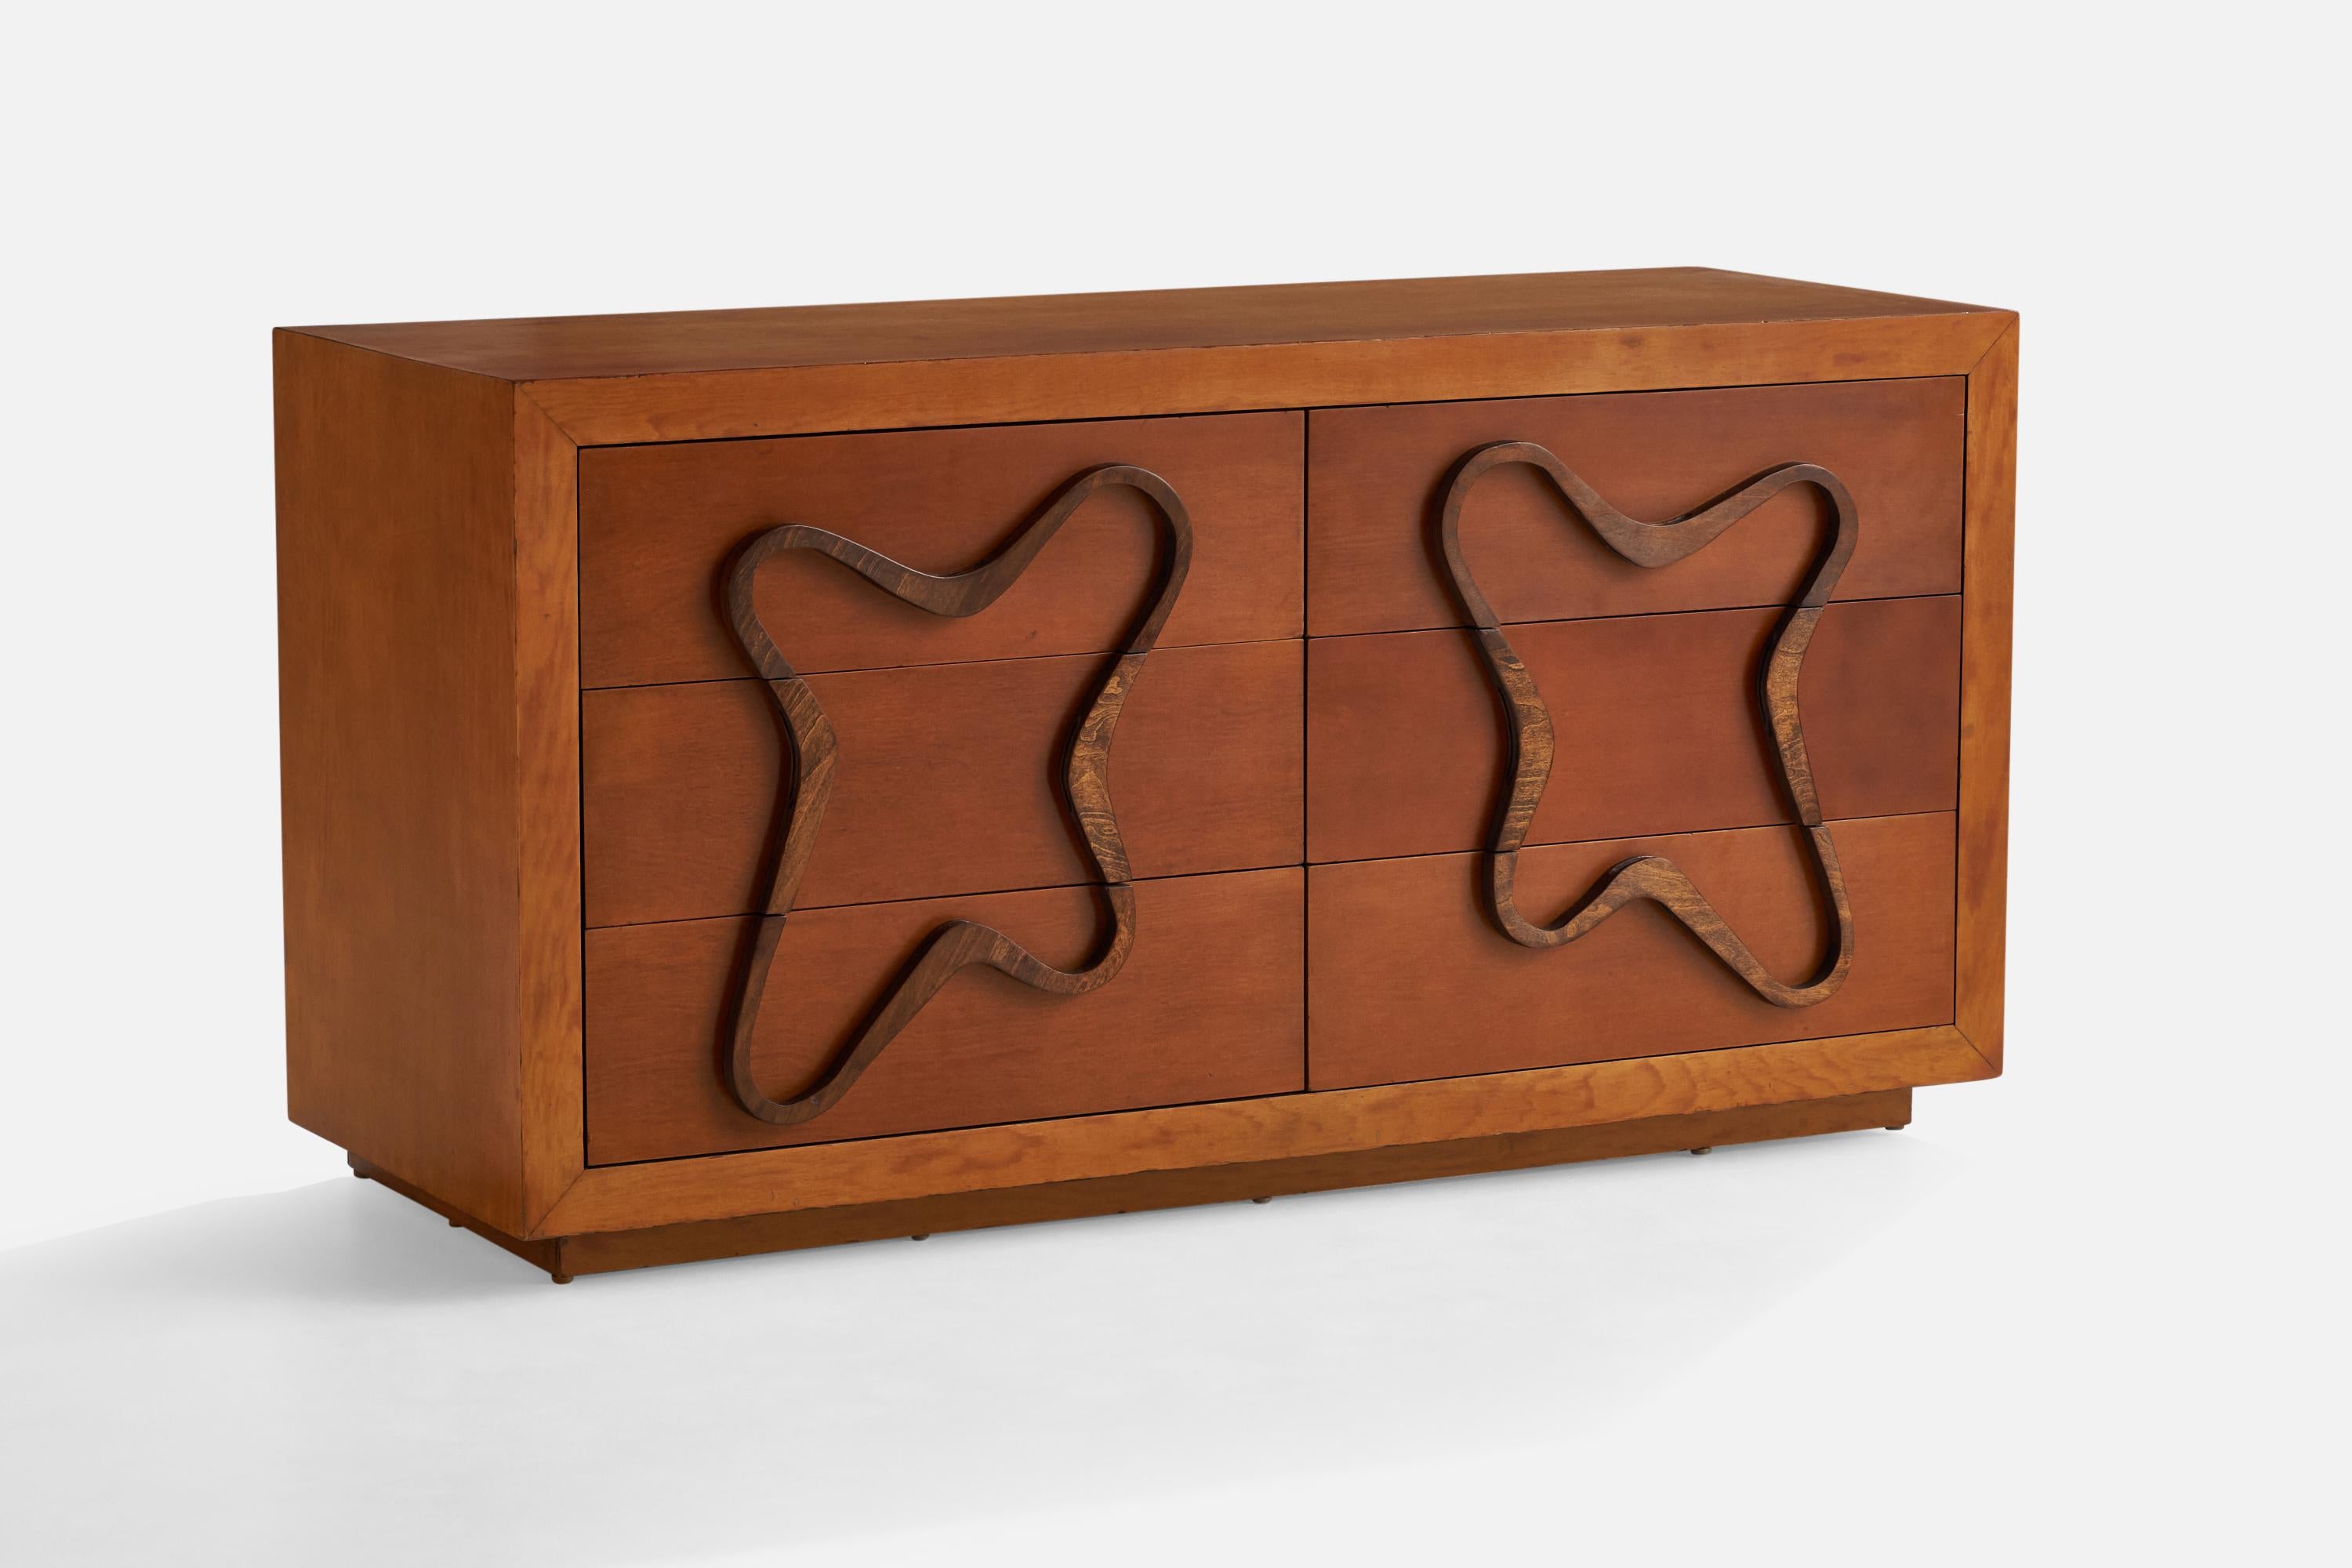 A walnut and dark-stained plywood dresser designed and produced by Maximilian For Karp Furniture Co, USA, 1950s.